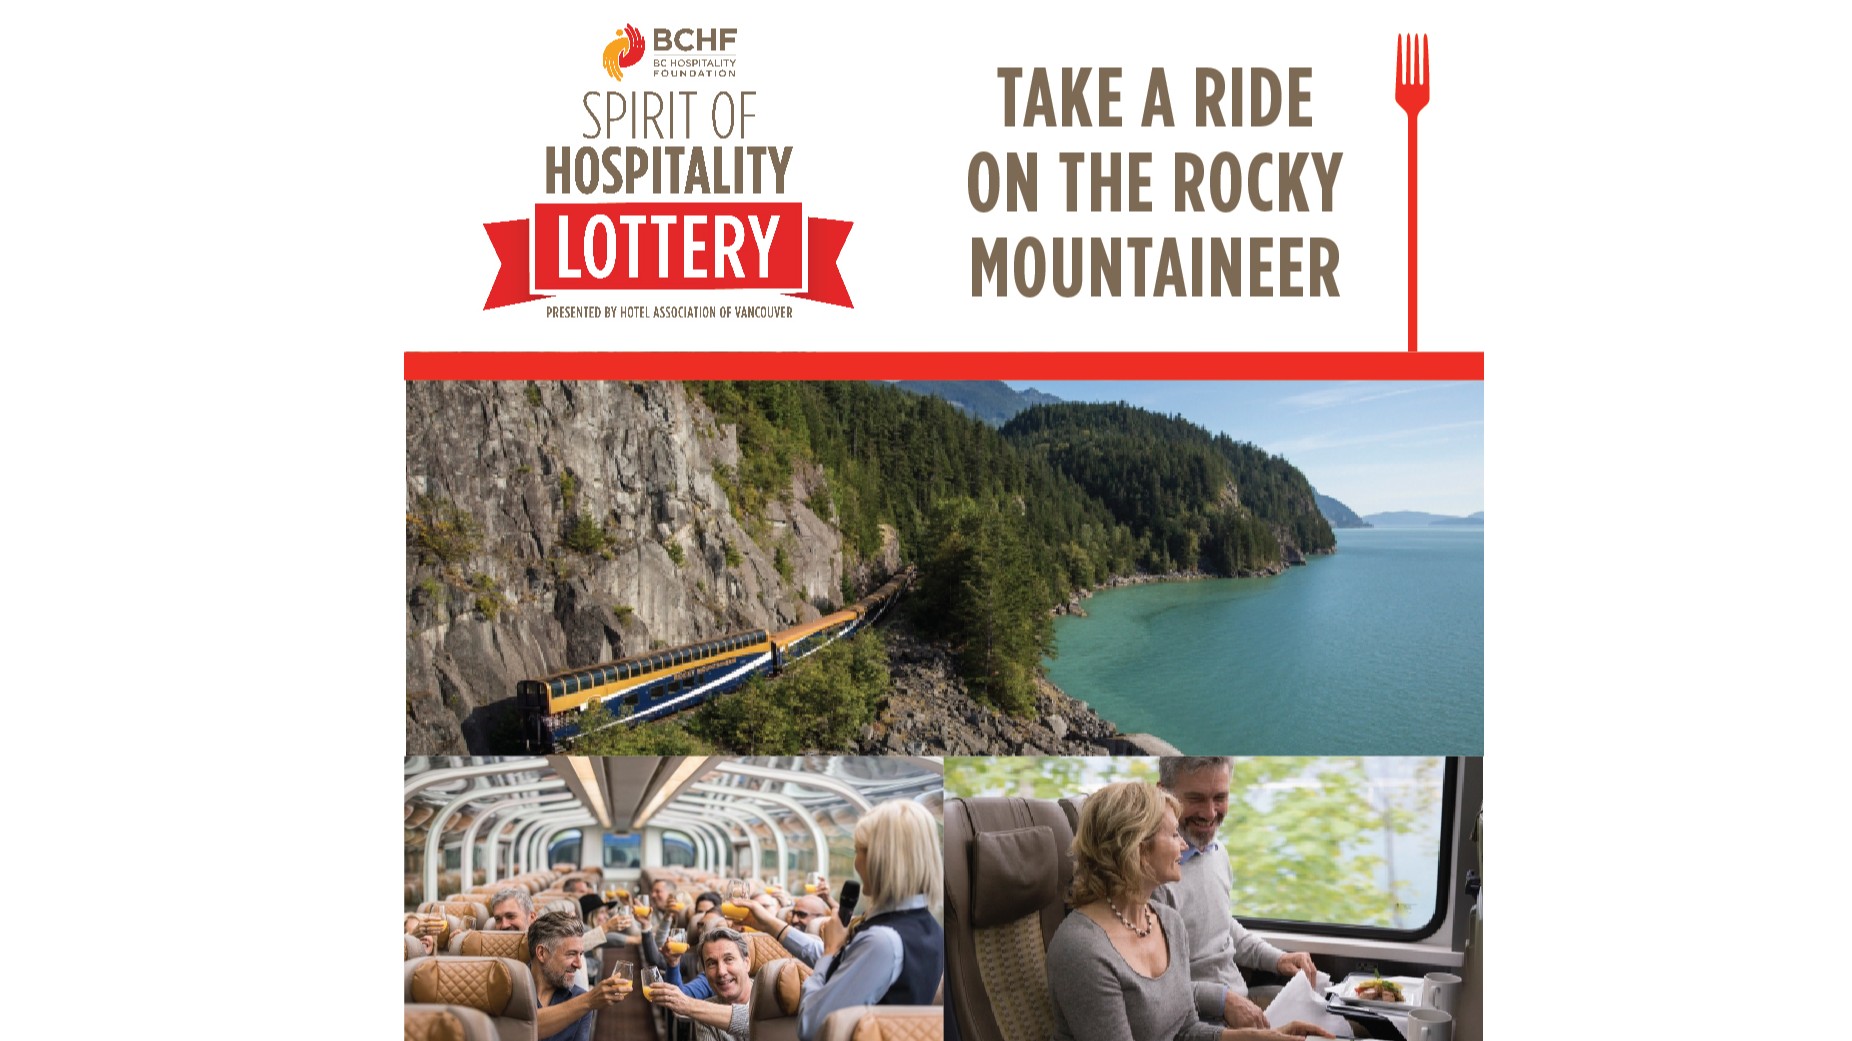 Take a Ride on the Rocky Mountaineer